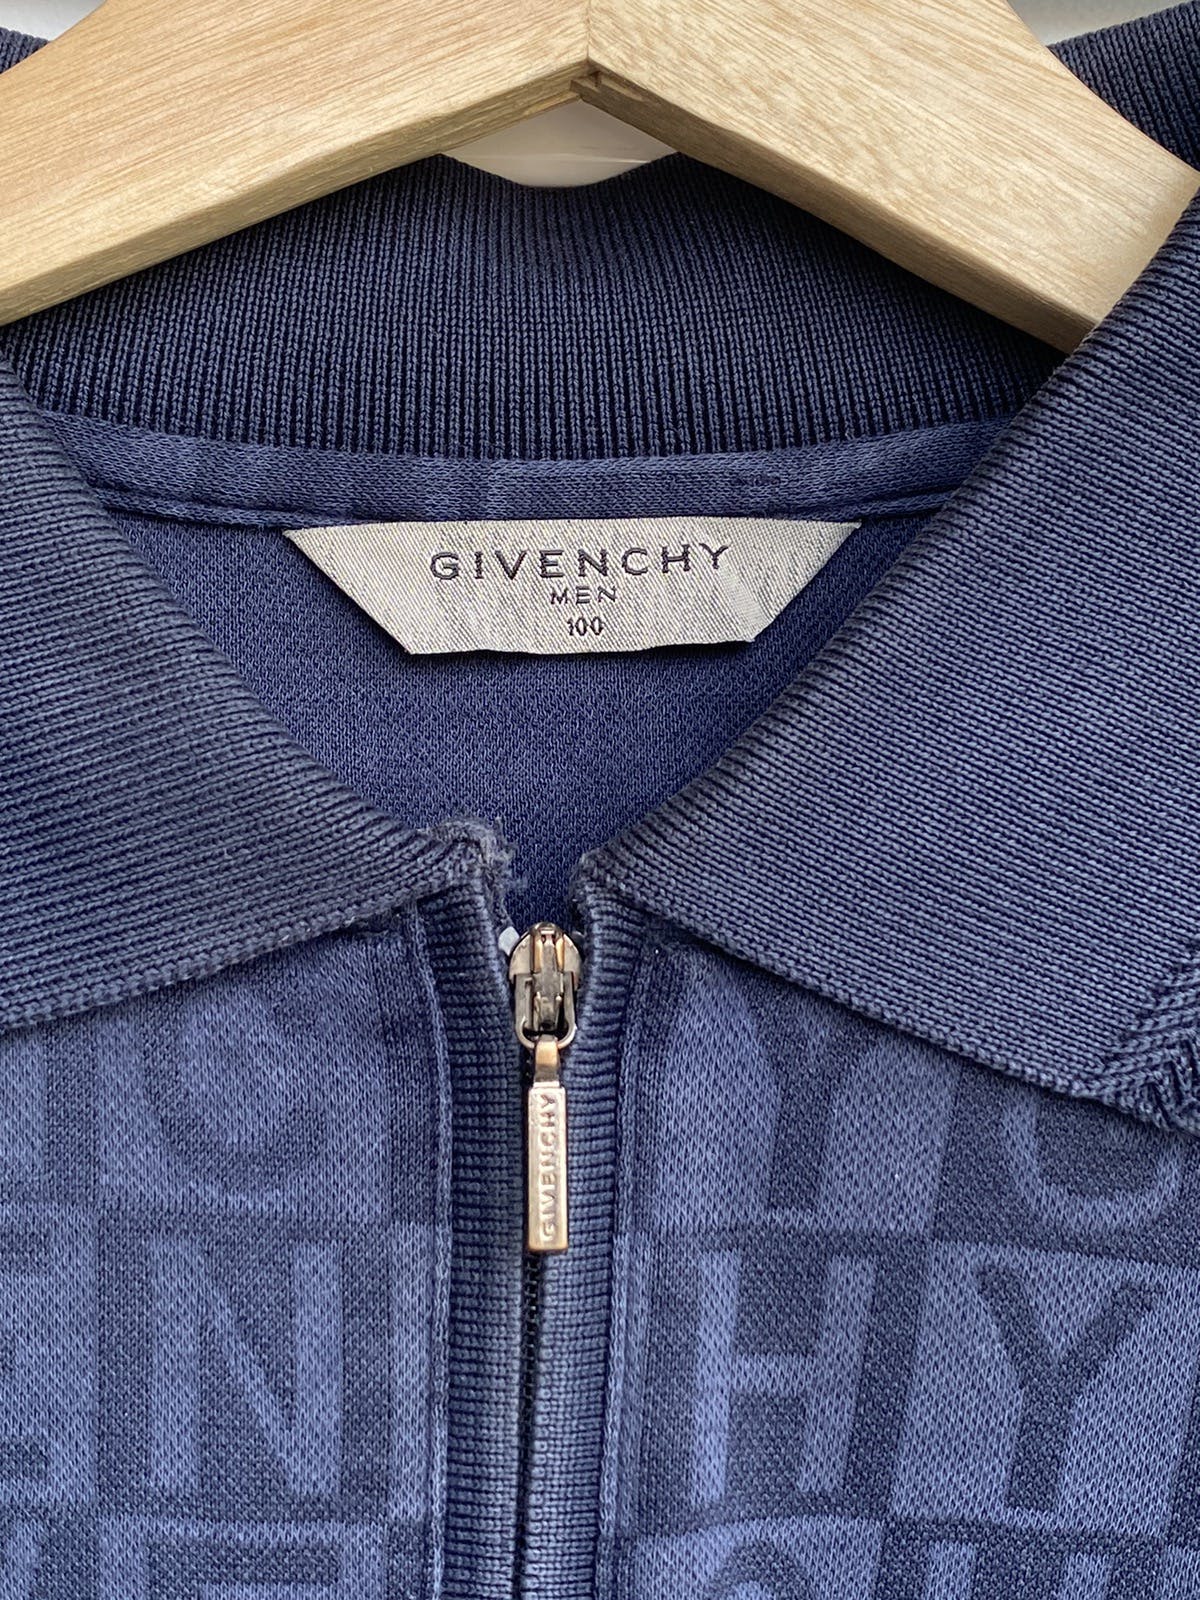 Vintage Givenchy Polo Longsleeves - 4